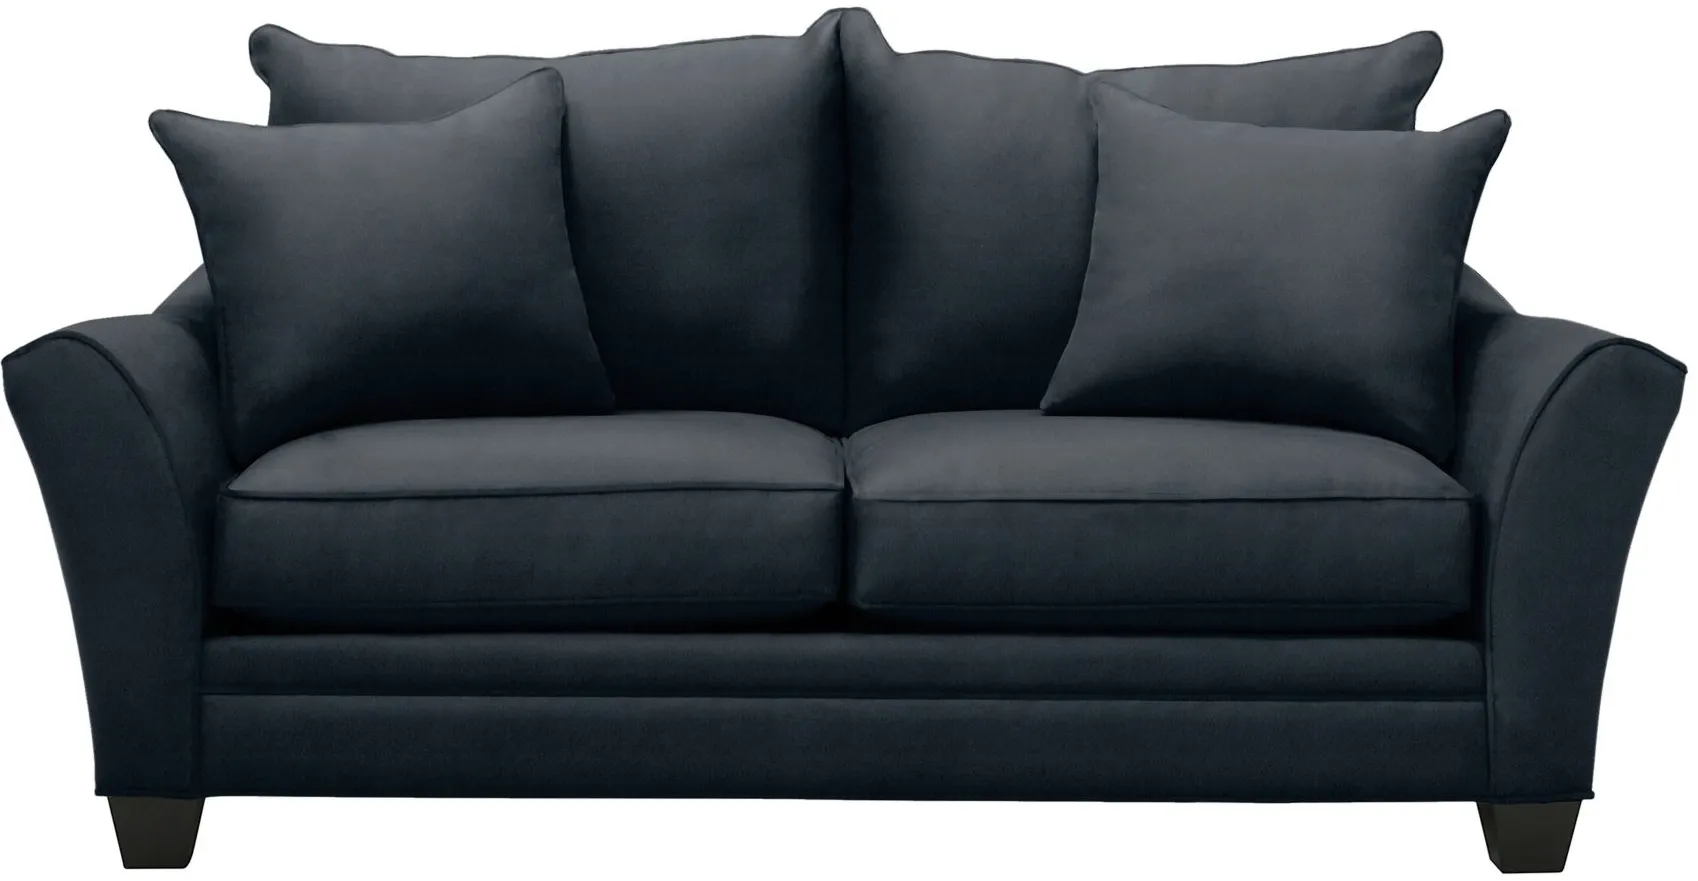 Briarwood Apartment Sleeper Sofa in Suede So Soft Midnight by H.M. Richards